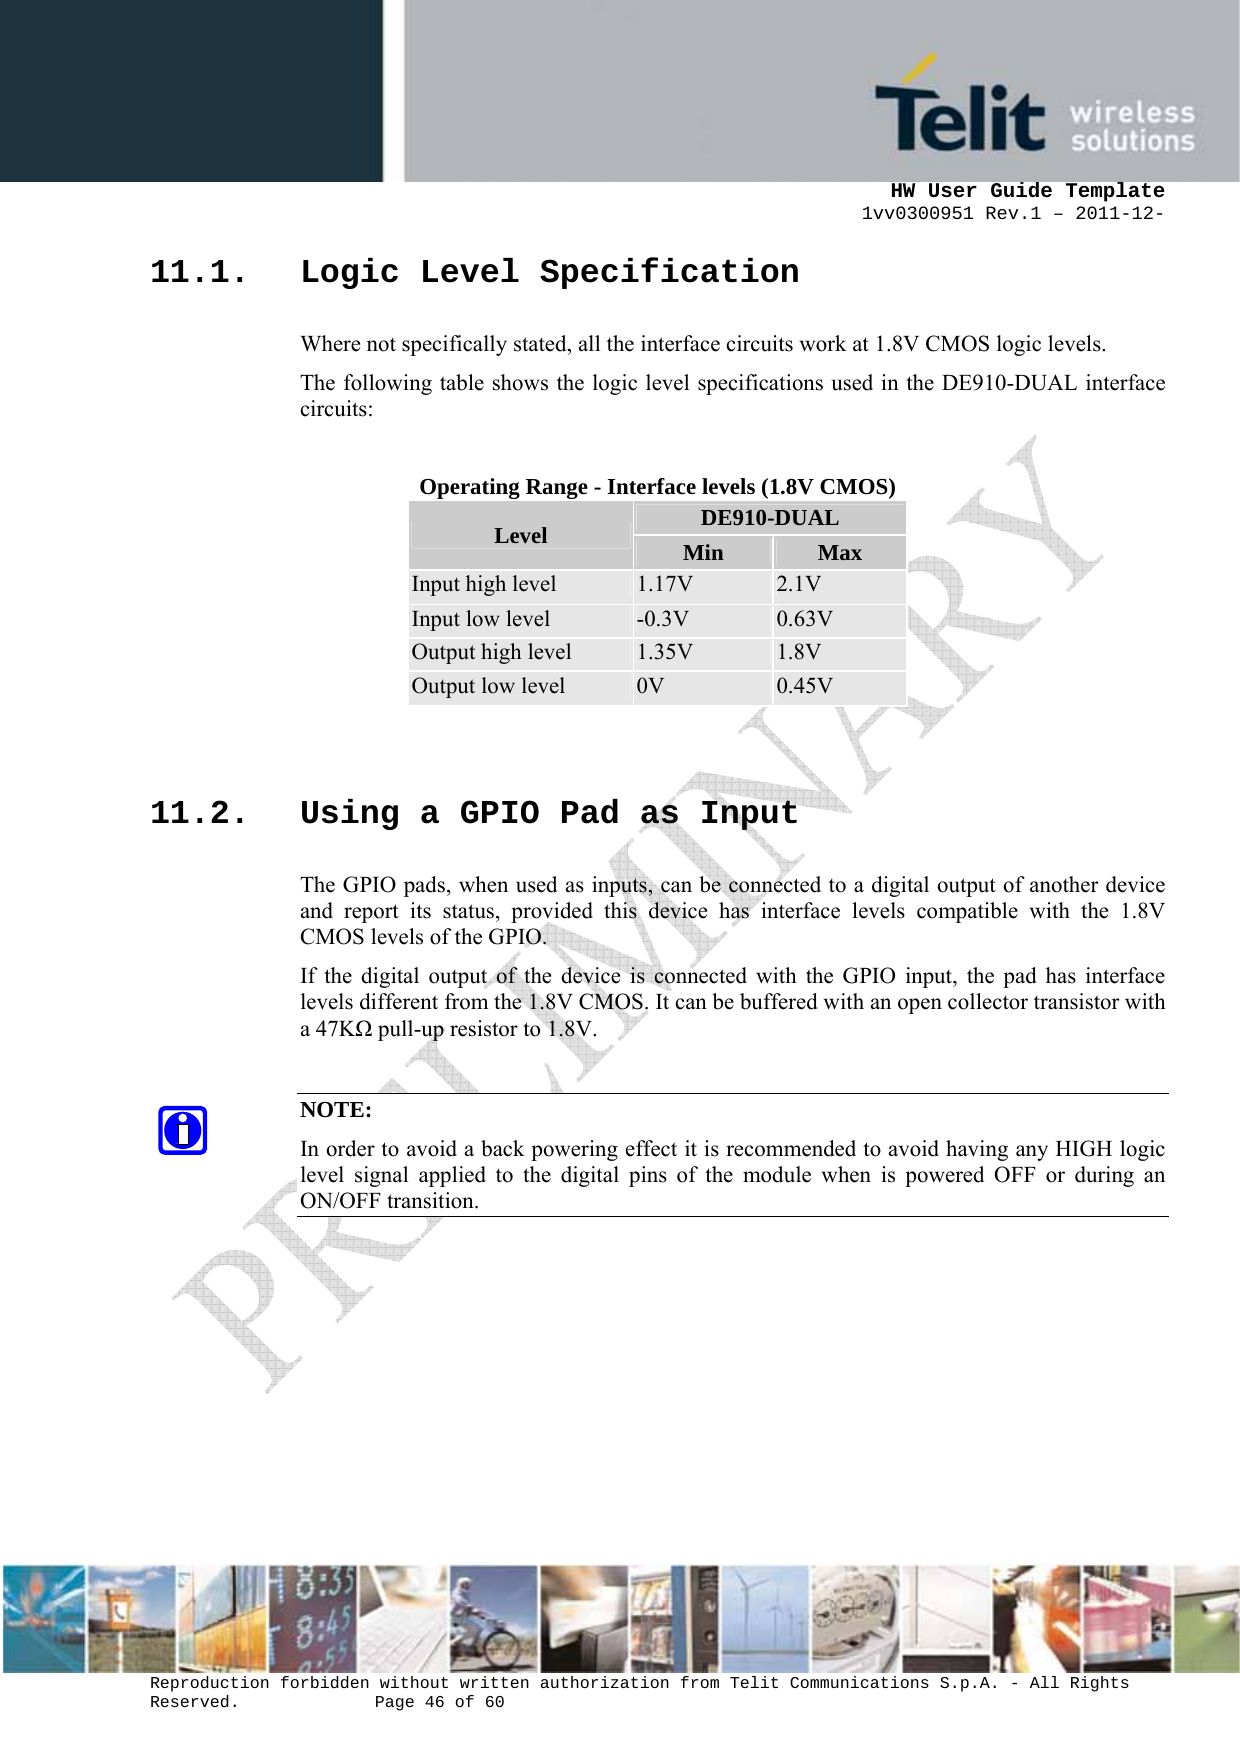      HW User Guide Template 1vv0300951 Rev.1 – 2011-12-  Reproduction forbidden without written authorization from Telit Communications S.p.A. - All Rights Reserved.    Page 46 of 60                                                     11.1. Logic Level Specification Where not specifically stated, all the interface circuits work at 1.8V CMOS logic levels. The following table shows the logic level specifications used in the DE910-DUAL interface circuits:  Operating Range - Interface levels (1.8V CMOS) Level  DE910-DUAL Min  Max Input high level  1.17V  2.1V Input low level  -0.3V  0.63V Output high level  1.35V  1.8V Output low level  0V  0.45V  11.2. Using a GPIO Pad as Input The GPIO pads, when used as inputs, can be connected to a digital output of another device and report its status, provided this device has interface levels compatible with the 1.8V CMOS levels of the GPIO.  If the digital output of the device is connected with the GPIO input, the pad has interface levels different from the 1.8V CMOS. It can be buffered with an open collector transistor with a 47KΩ pull-up resistor to 1.8V.  NOTE: In order to avoid a back powering effect it is recommended to avoid having any HIGH logic level signal applied to the digital pins of the module when is powered OFF or during an ON/OFF transition.        